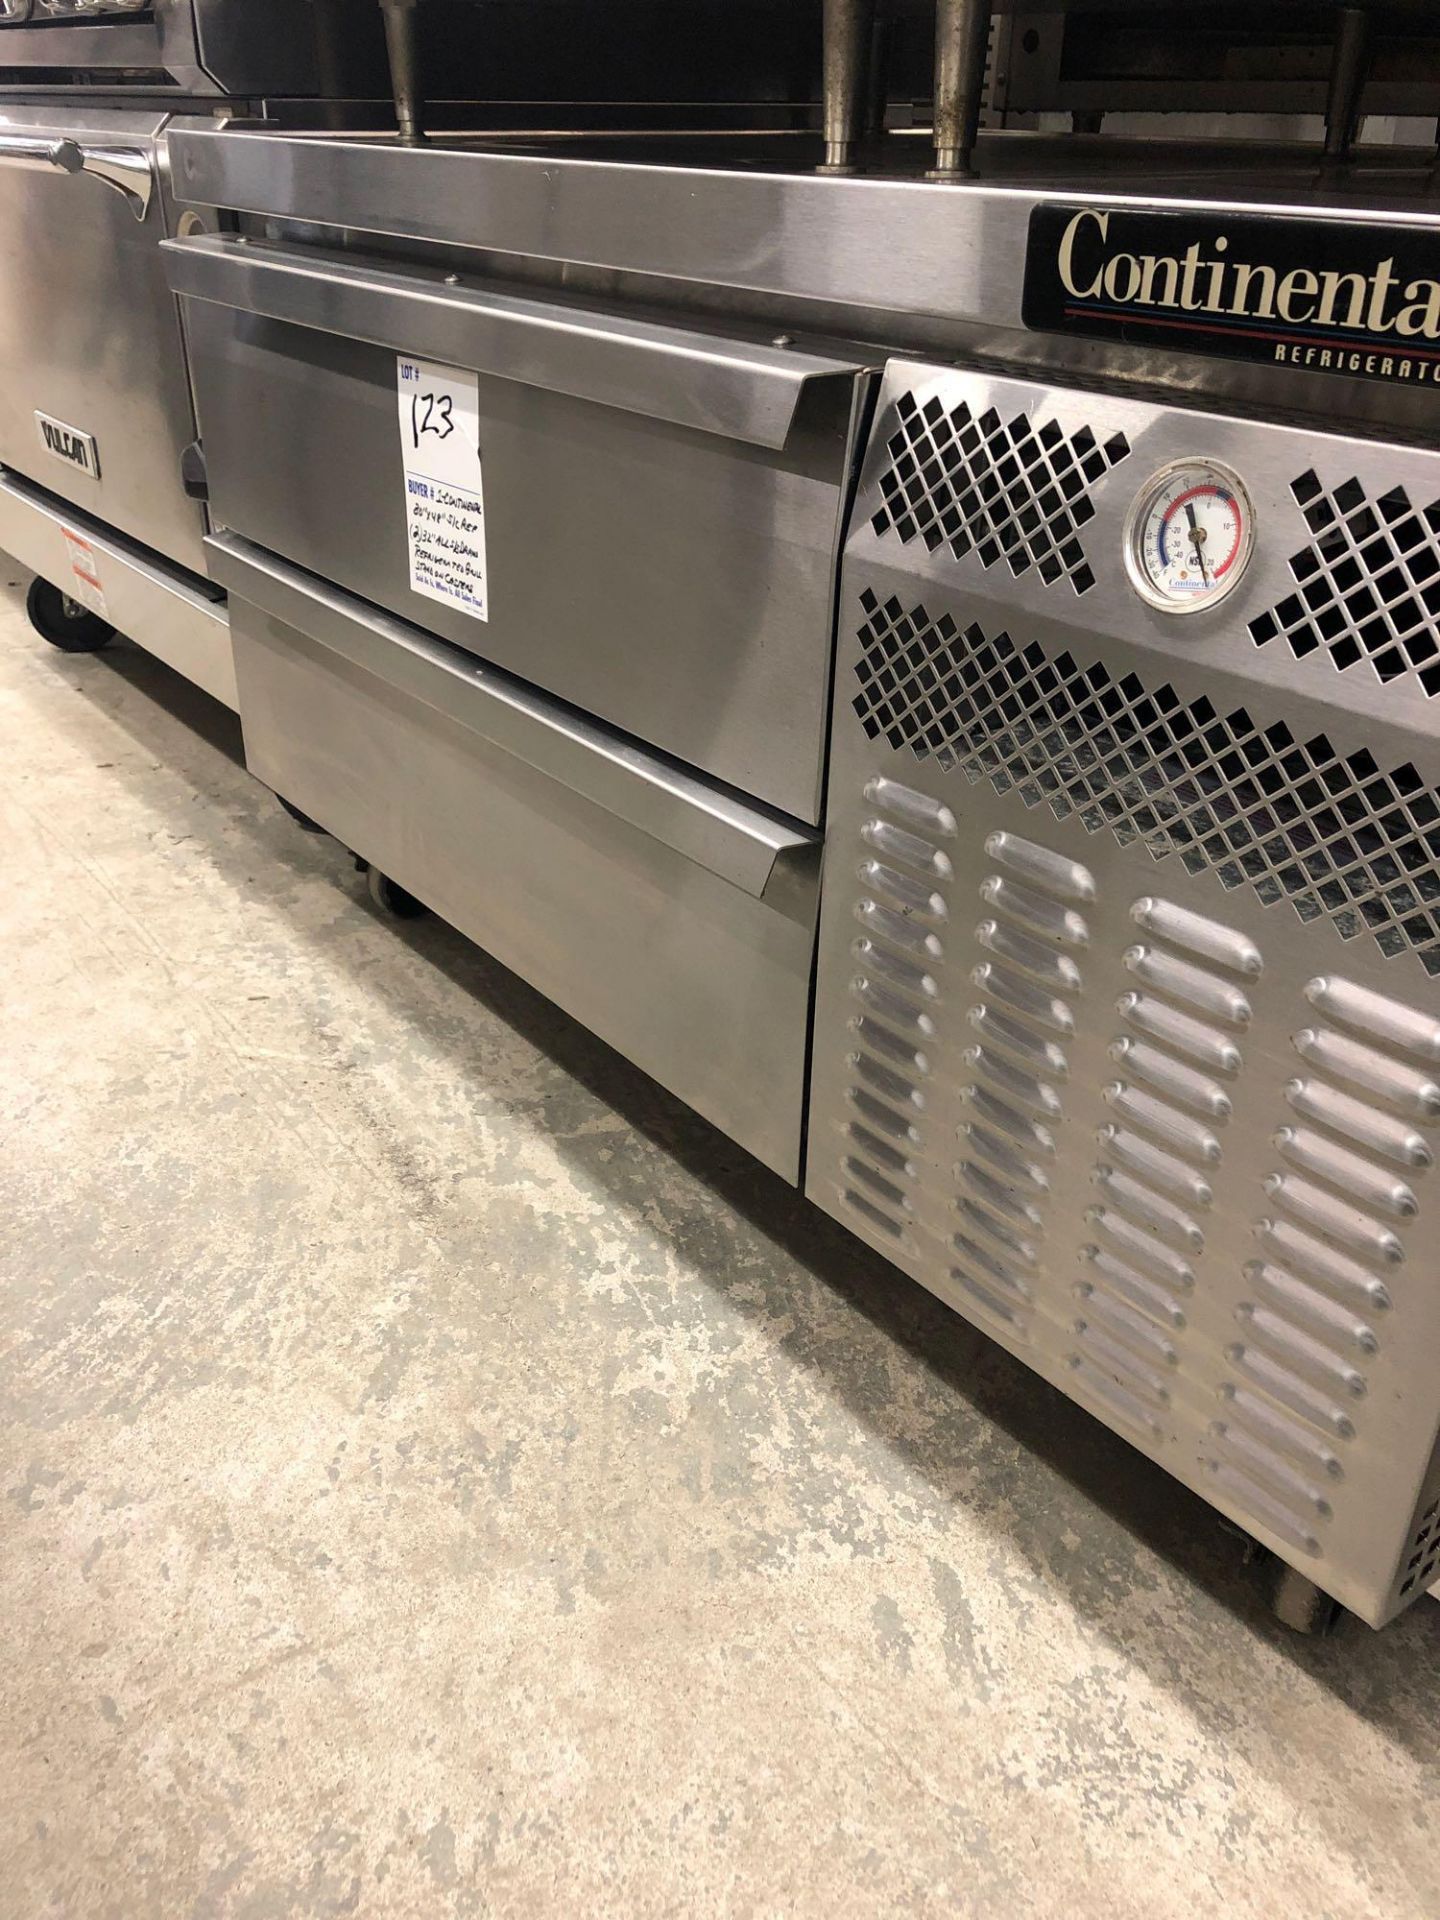 Continental 4 foot refrigerated chef base